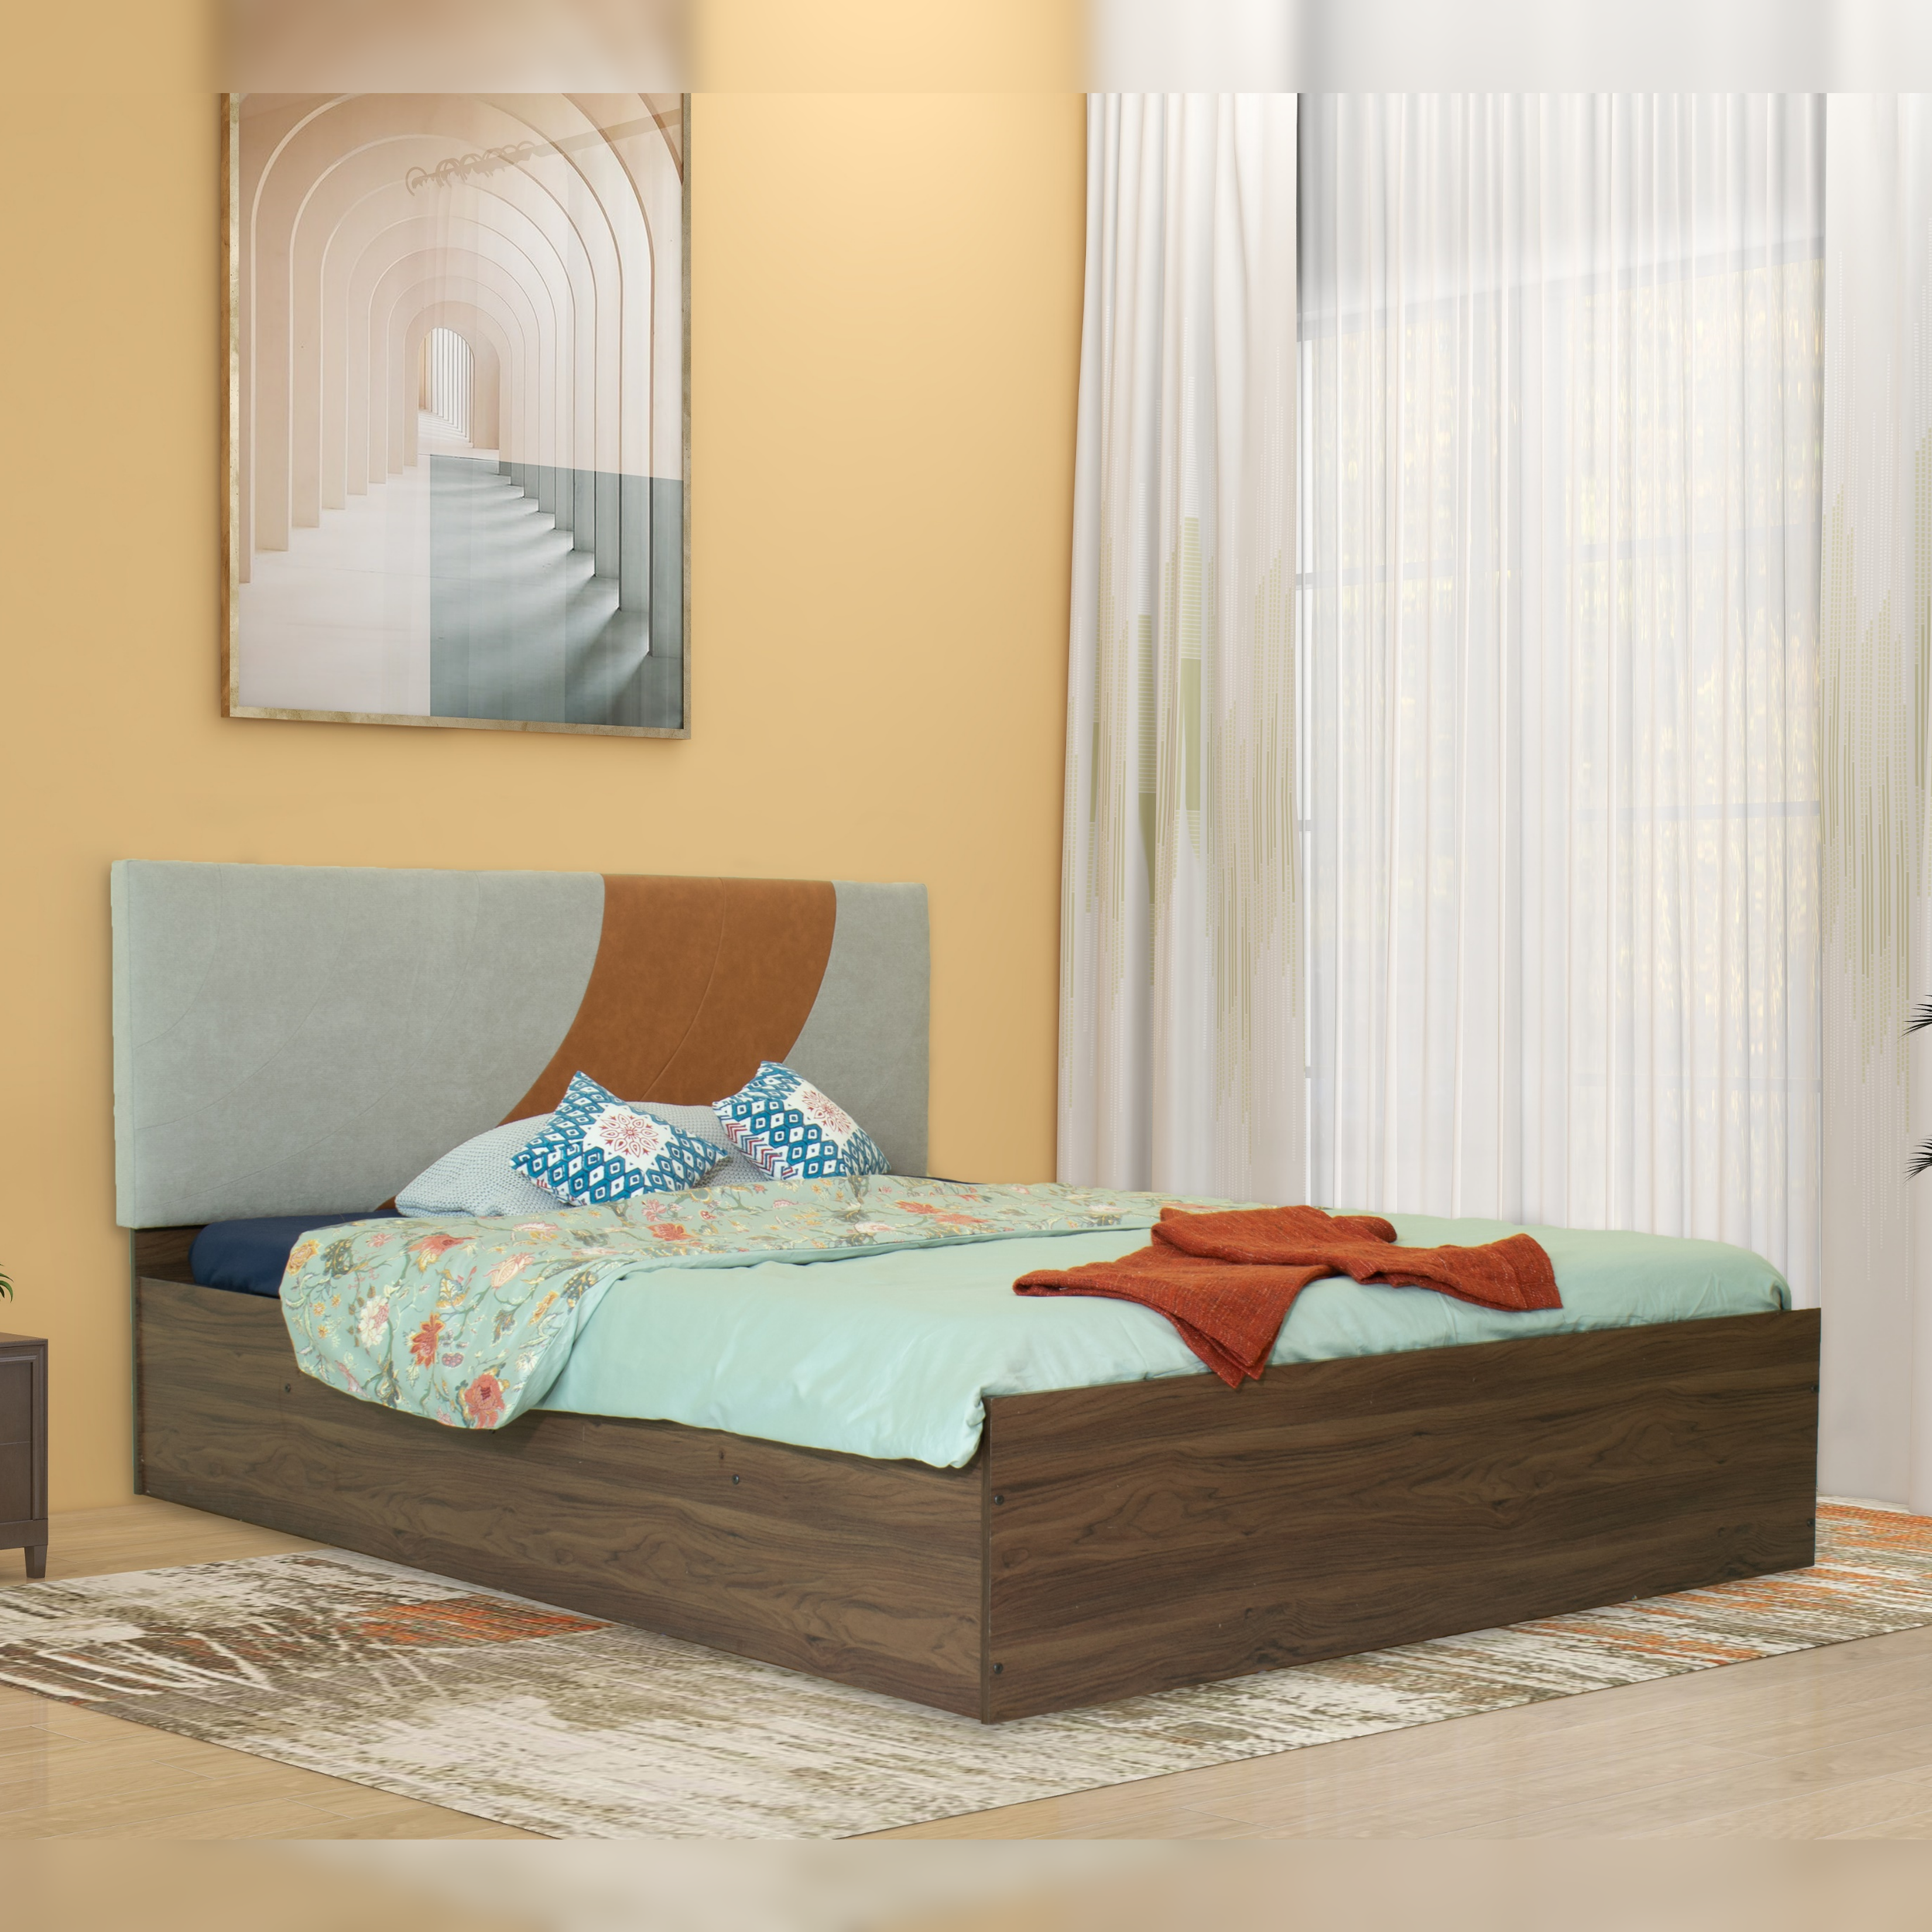 Ashtanga Bed With Premium Leatherette Fabric And Box Storage - Queen Bed